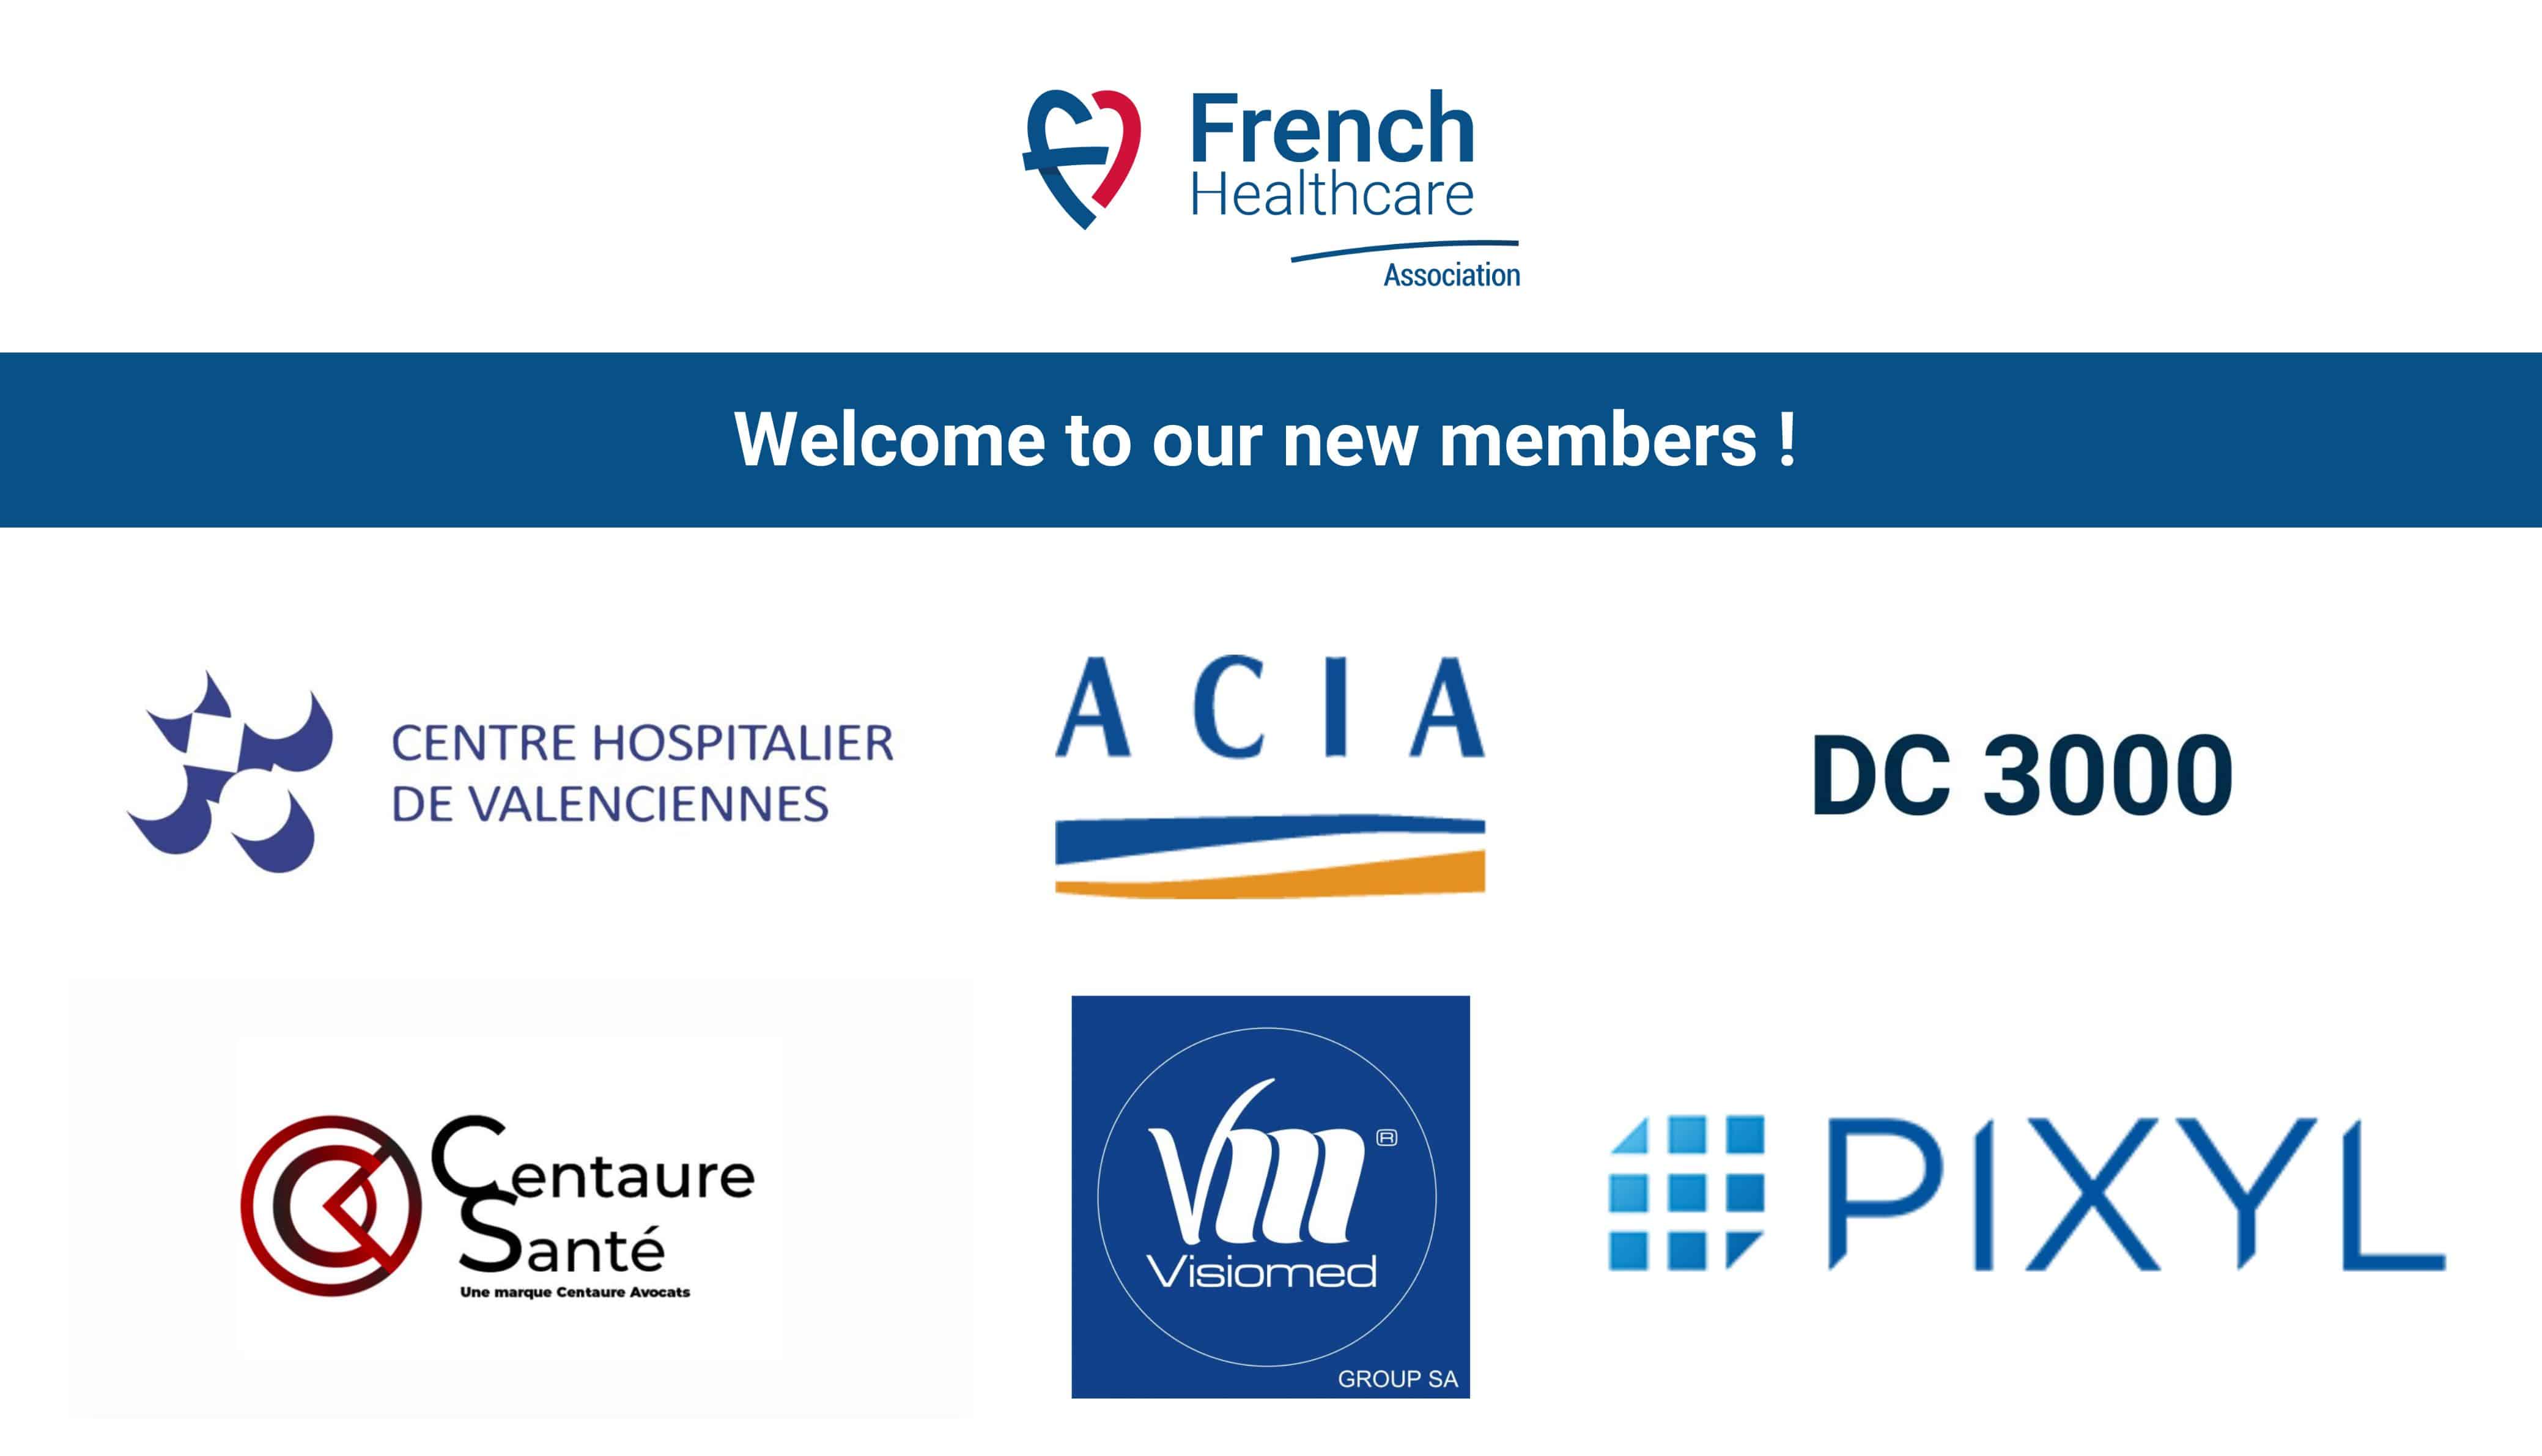 A montage of all logos from the new members of French Healthcare Association, who joined in September